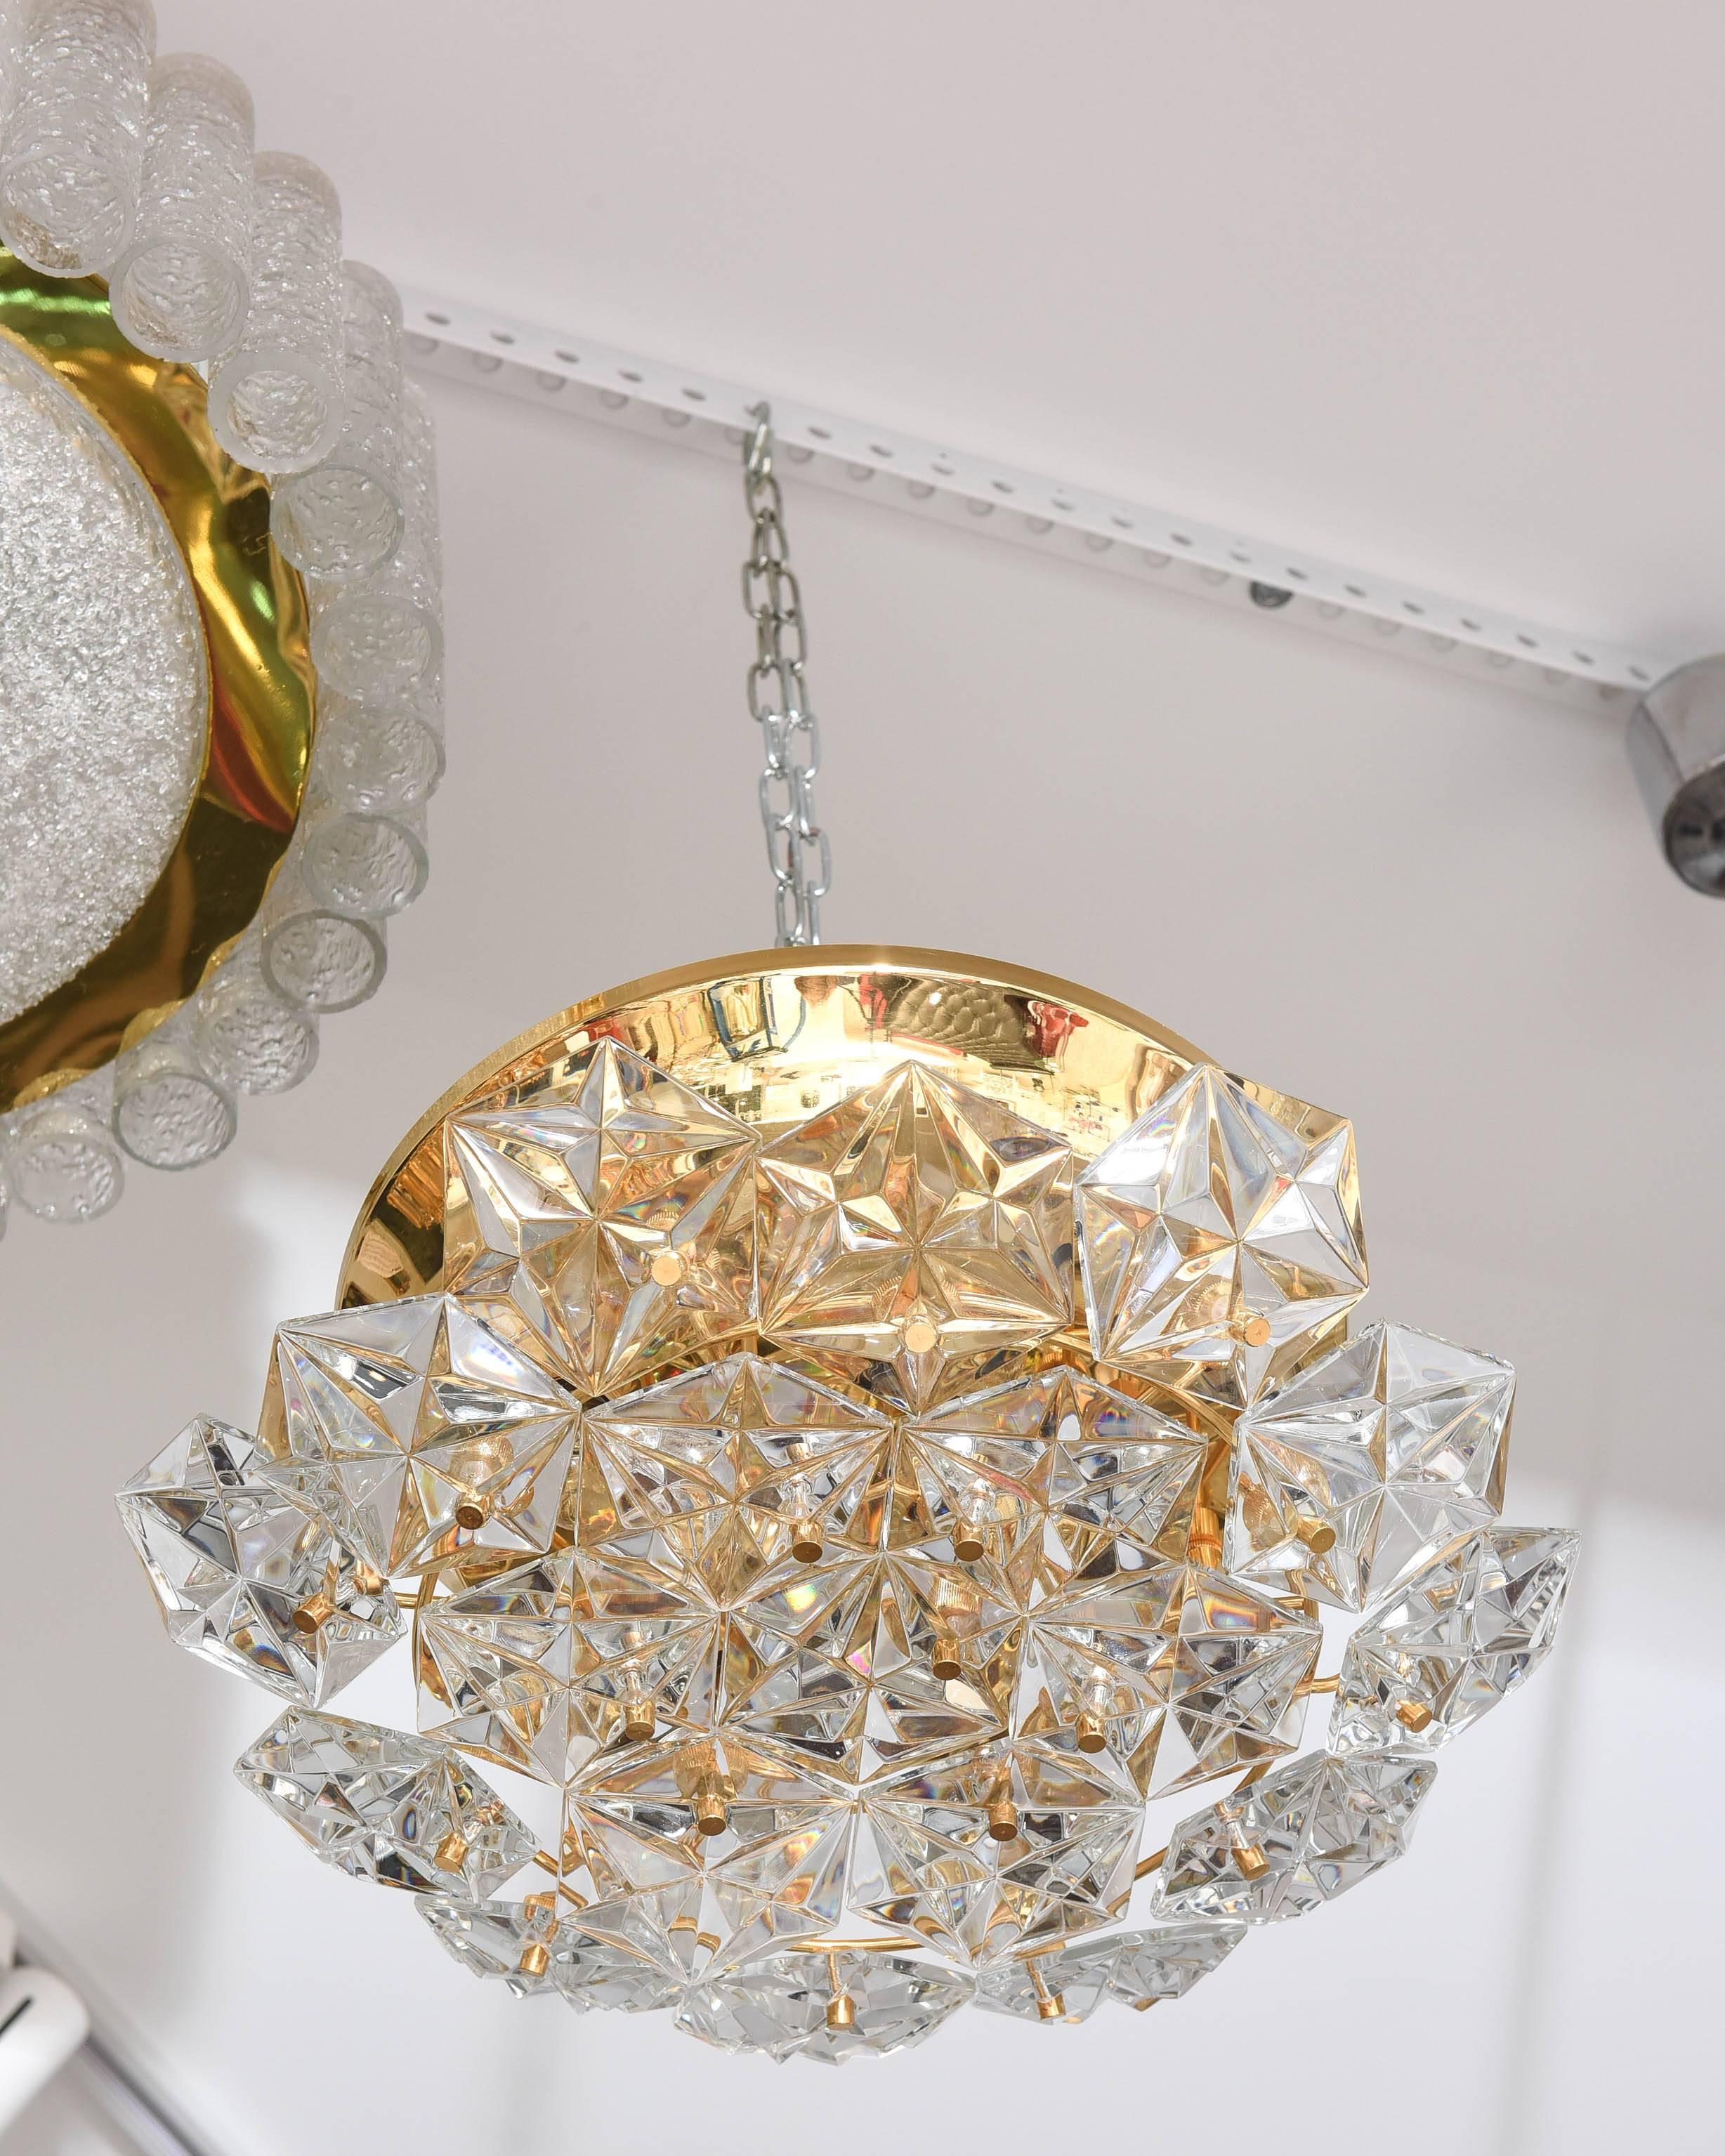 This beautiful chandelier definitely has the glamorous Hollywood-Regency style to it with its gold plated hardware and Northern Star motif polygon shaped prisms.  It was created in the 1970s by the iconic firm of Kinkeldey..

Note:  This piece